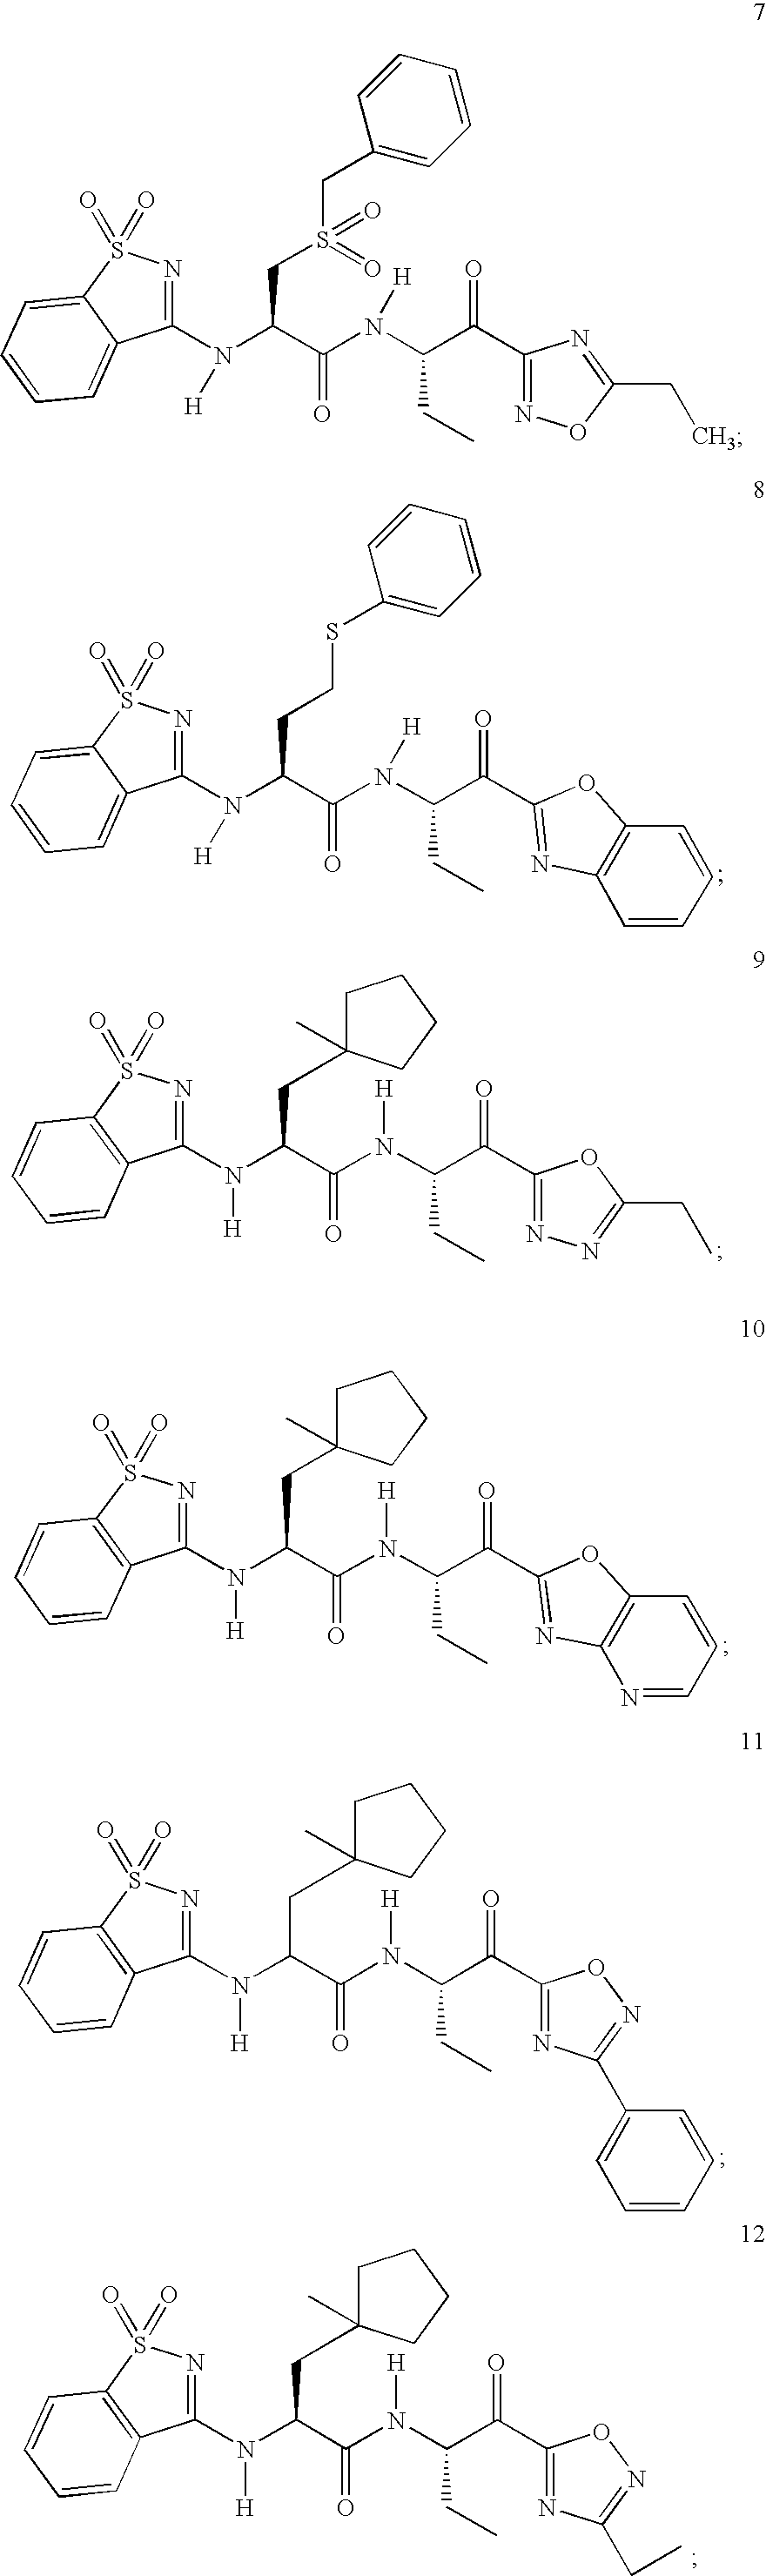 Amidino compounds as cysteine protease inhibitors